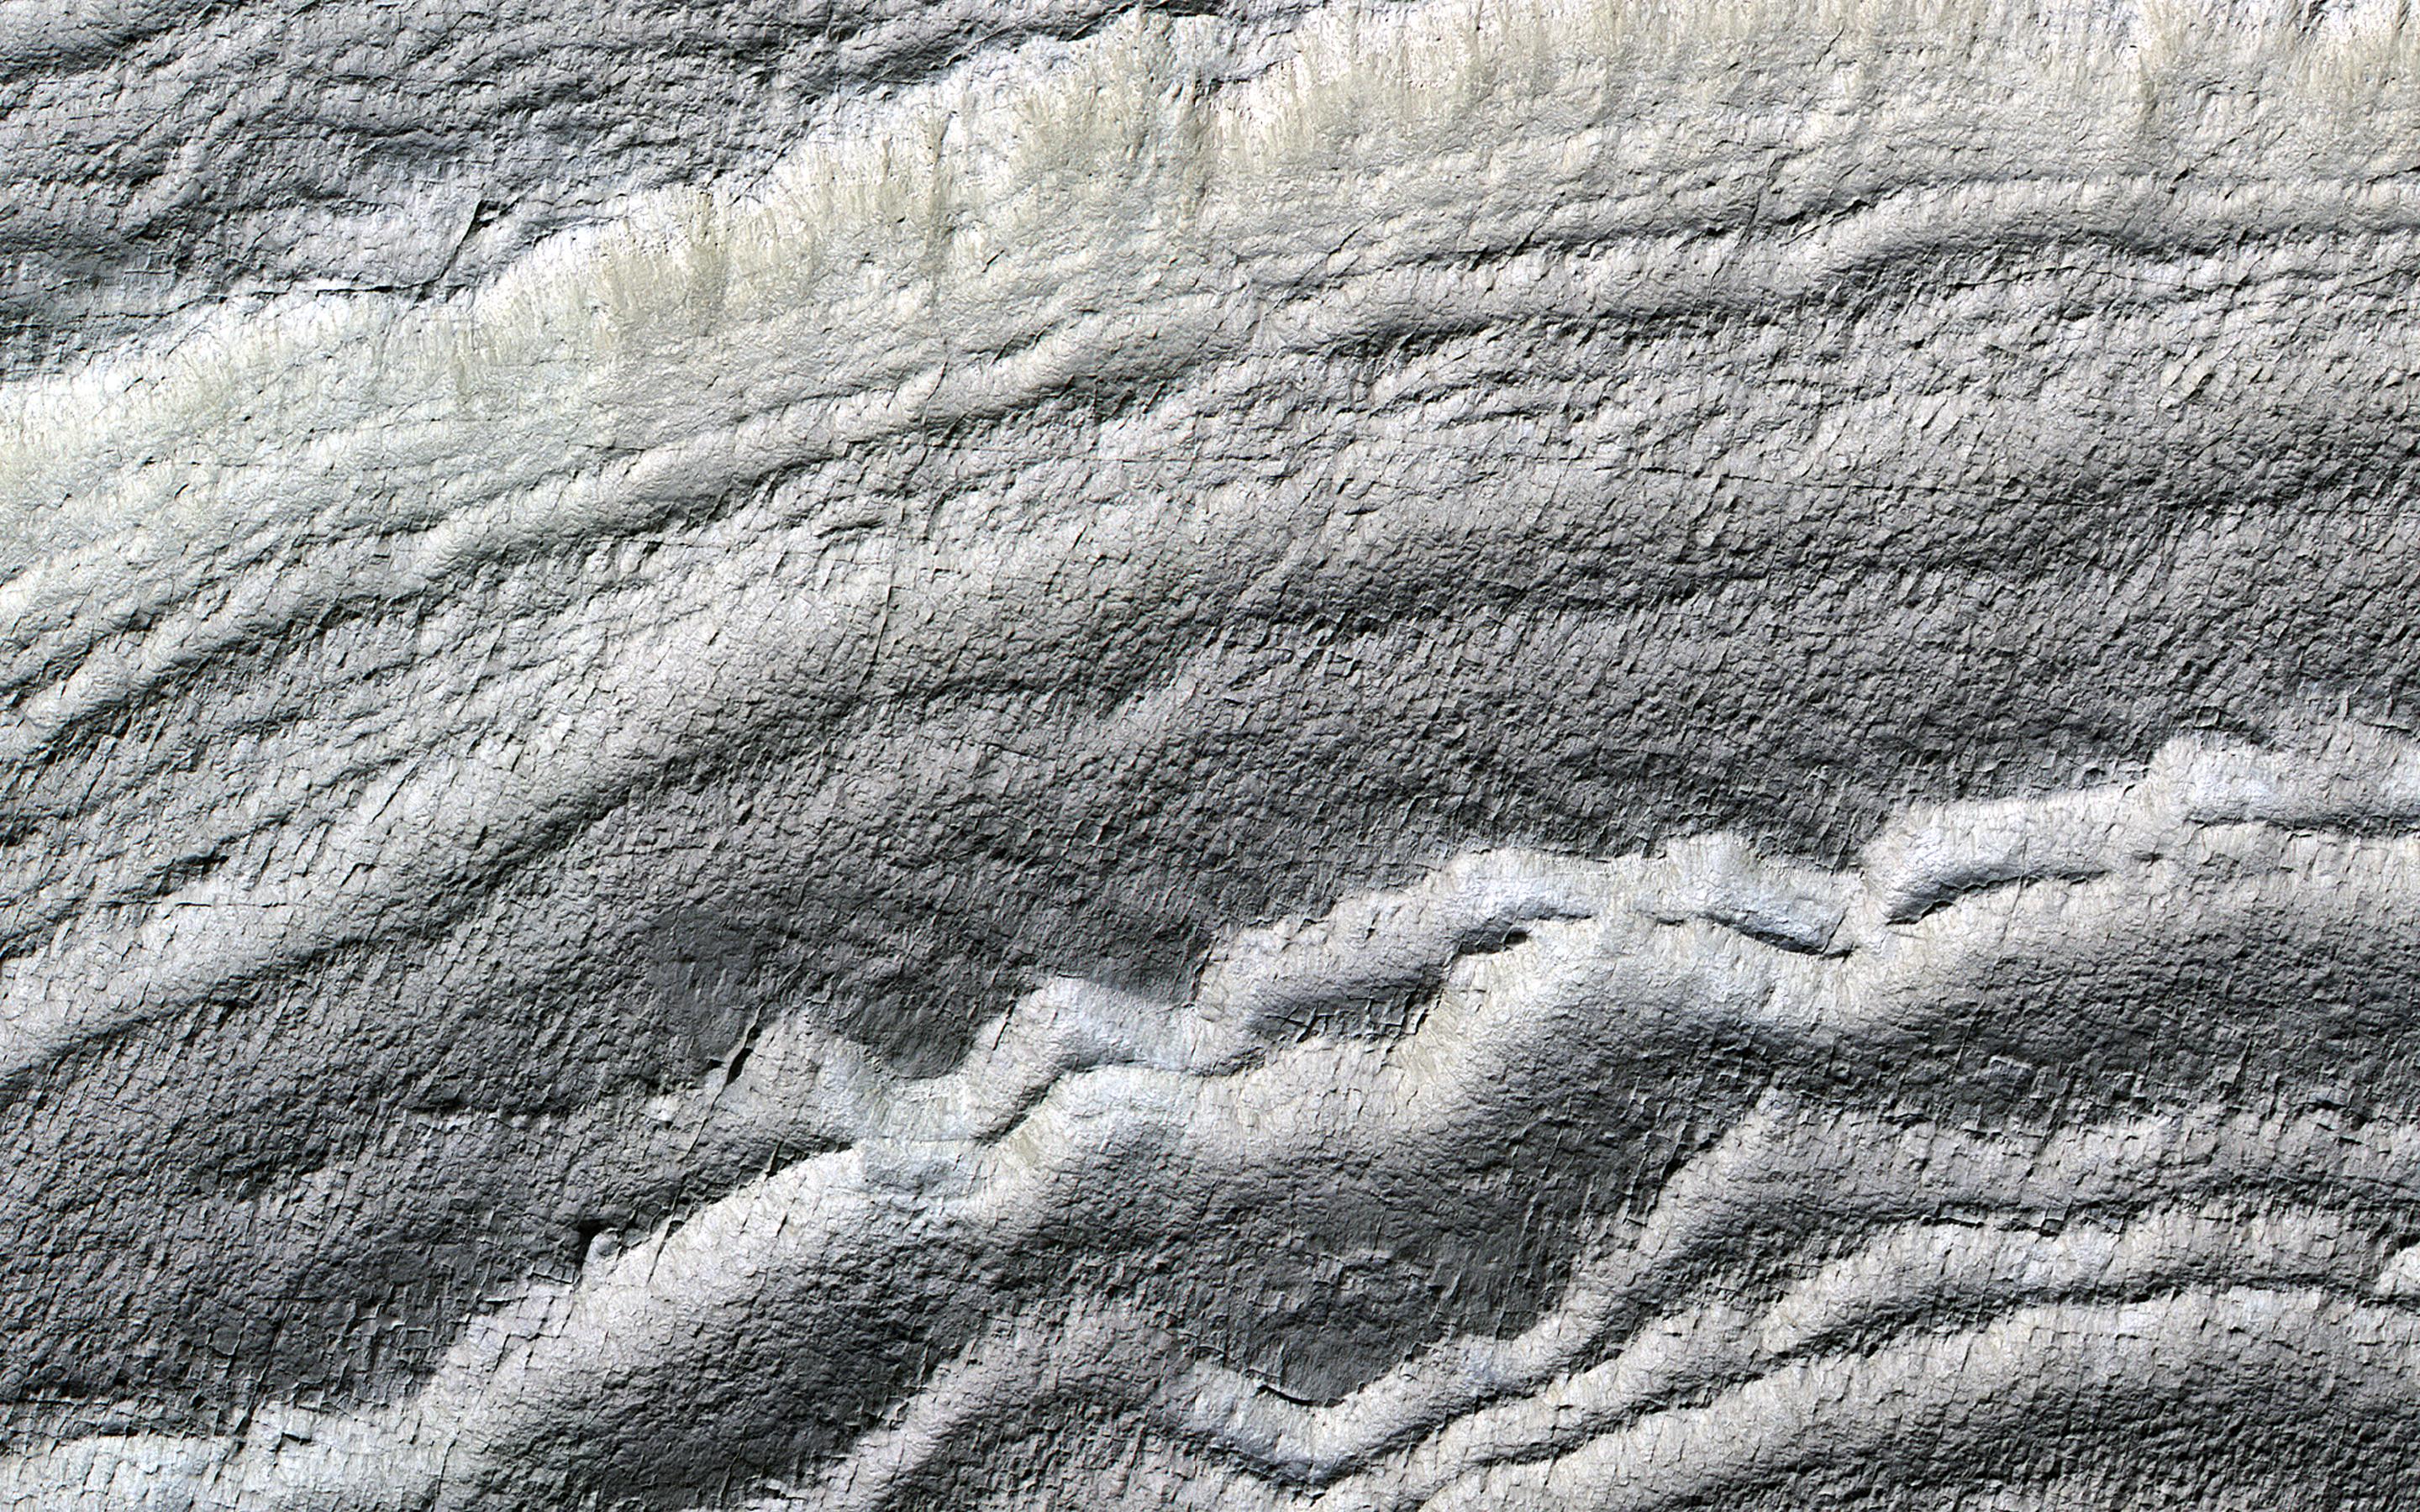 This image acquired on January 21, 2019 by NASAs Mars Reconnaissance Orbiter, shows the south polar layered deposits are well illuminated to accentuate the topography.